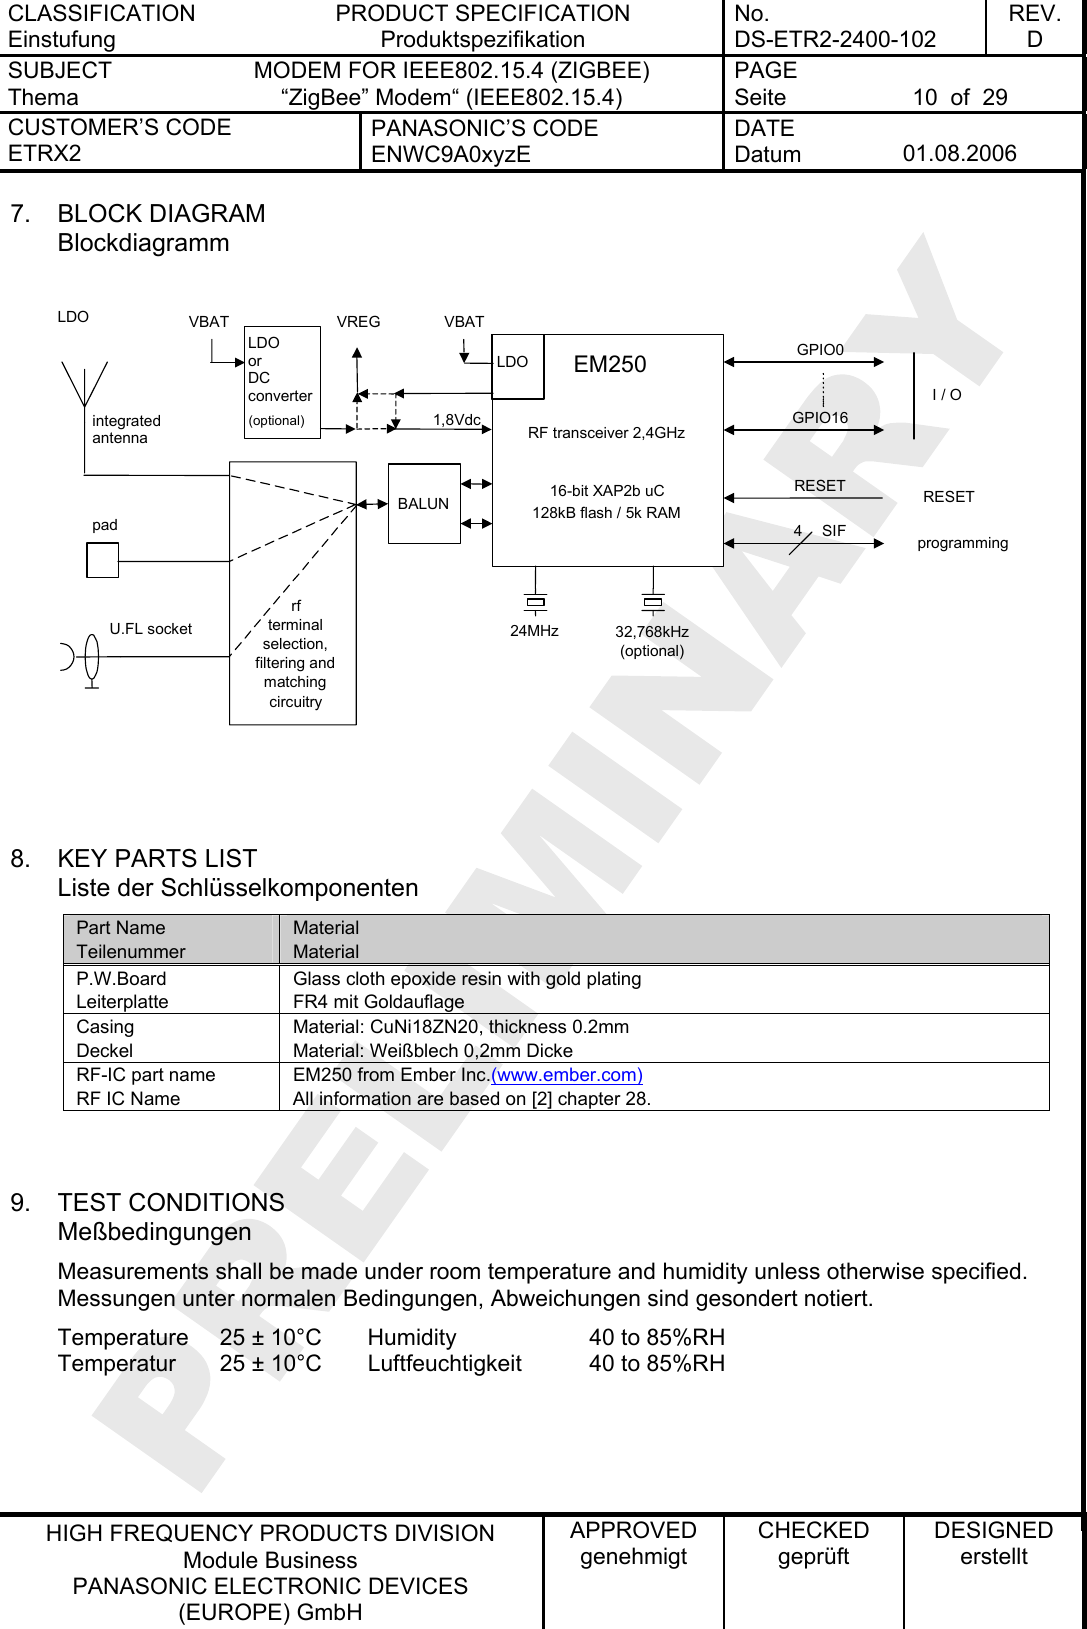 CLASSIFICATION Einstufung PRODUCT SPECIFICATION Produktspezifikation No. DS-ETR2-2400-102 REV. D SUBJECT Thema MODEM FOR IEEE802.15.4 (ZIGBEE) “ZigBee” Modem“ (IEEE802.15.4)   PAGE Seite  10  of  29 CUSTOMER’S CODE ETRX2 PANASONIC’S CODE ENWC9A0xyzE DATE Datum  01.08.2006   HIGH FREQUENCY PRODUCTS DIVISION Module Business PANASONIC ELECTRONIC DEVICES  (EUROPE) GmbH APPROVED genehmigt CHECKED geprüft DESIGNED erstellt 7. BLOCK DIAGRAM Blockdiagramm  LDO  24MHz 32,768kHz(optional)EM250RF transceiver 2,4GHz16-bit XAP2b uC128kB flash / 5k RAMGPIO0 GPIO16 I / Oprogramming4 SIF LDO or DC converter (optional) VBATVBAT VREG RESET RESETBALUNintegrated antenna pad U.FL socket rf terminal selection, filtering and matching circuitry    LDO 1,8Vdc   8.  KEY PARTS LIST Liste der Schlüsselkomponenten Part Name Teilenummer Material Material P.W.Board Leiterplatte Glass cloth epoxide resin with gold plating  FR4 mit Goldauflage Casing Deckel Material: CuNi18ZN20, thickness 0.2mm Material: Weißblech 0,2mm Dicke RF-IC part name RF IC Name EM250 from Ember Inc.(www.ember.com) All information are based on [2] chapter 28.   9. TEST CONDITIONS Meßbedingungen Measurements shall be made under room temperature and humidity unless otherwise specified. Messungen unter normalen Bedingungen, Abweichungen sind gesondert notiert. Temperature  25 ± 10°C  Humidity    40 to 85%RH Temperatur  25 ± 10°C  Luftfeuchtigkeit  40 to 85%RH  